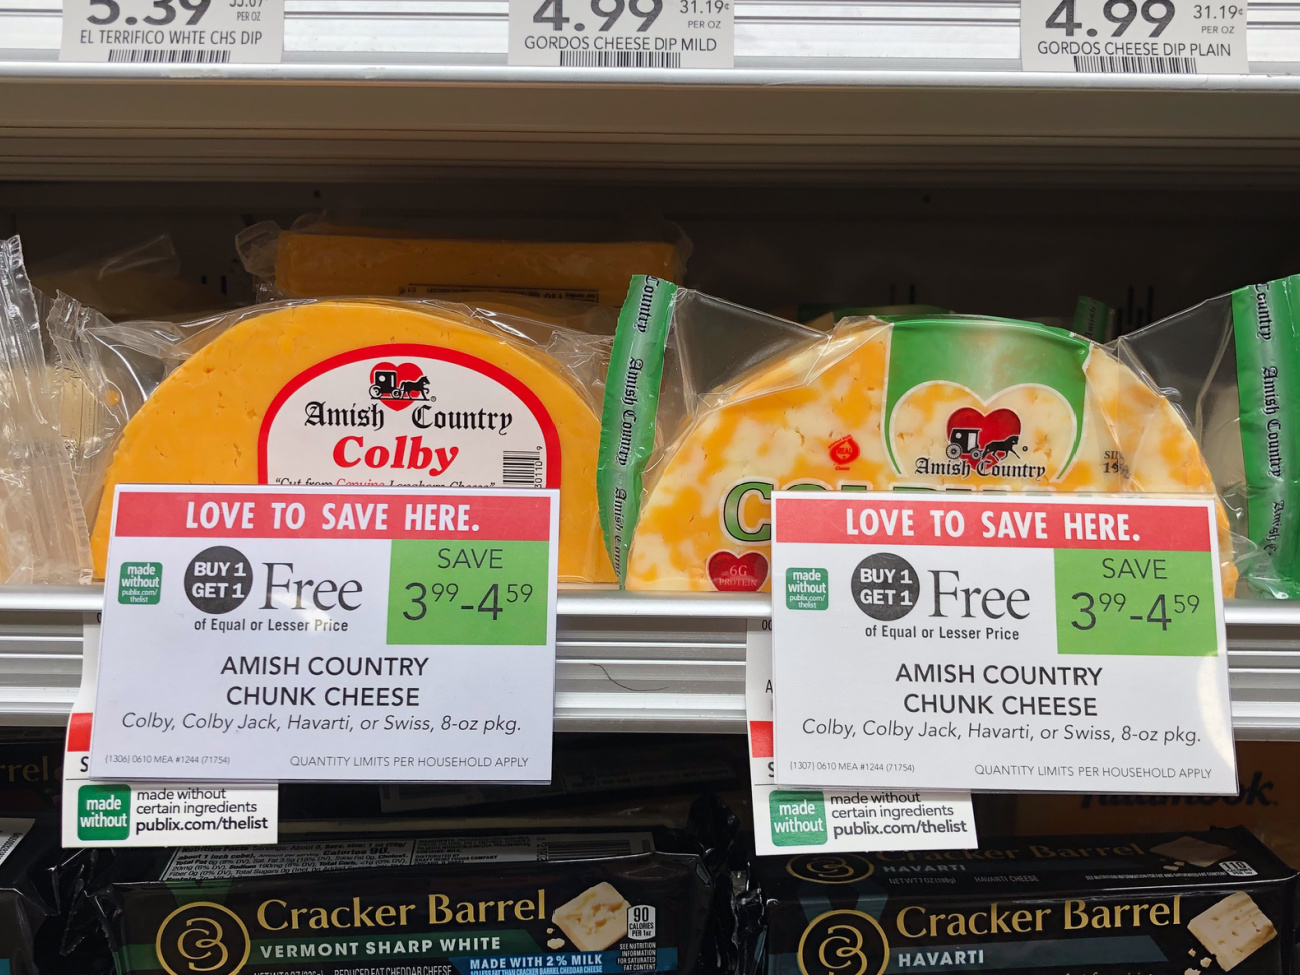 Delicious Amish Country Cheese Is BOGO At Publix - Use It To Serve Up A Tasty Breakfast Your Whole Family Will Love! on I Heart Publix 2